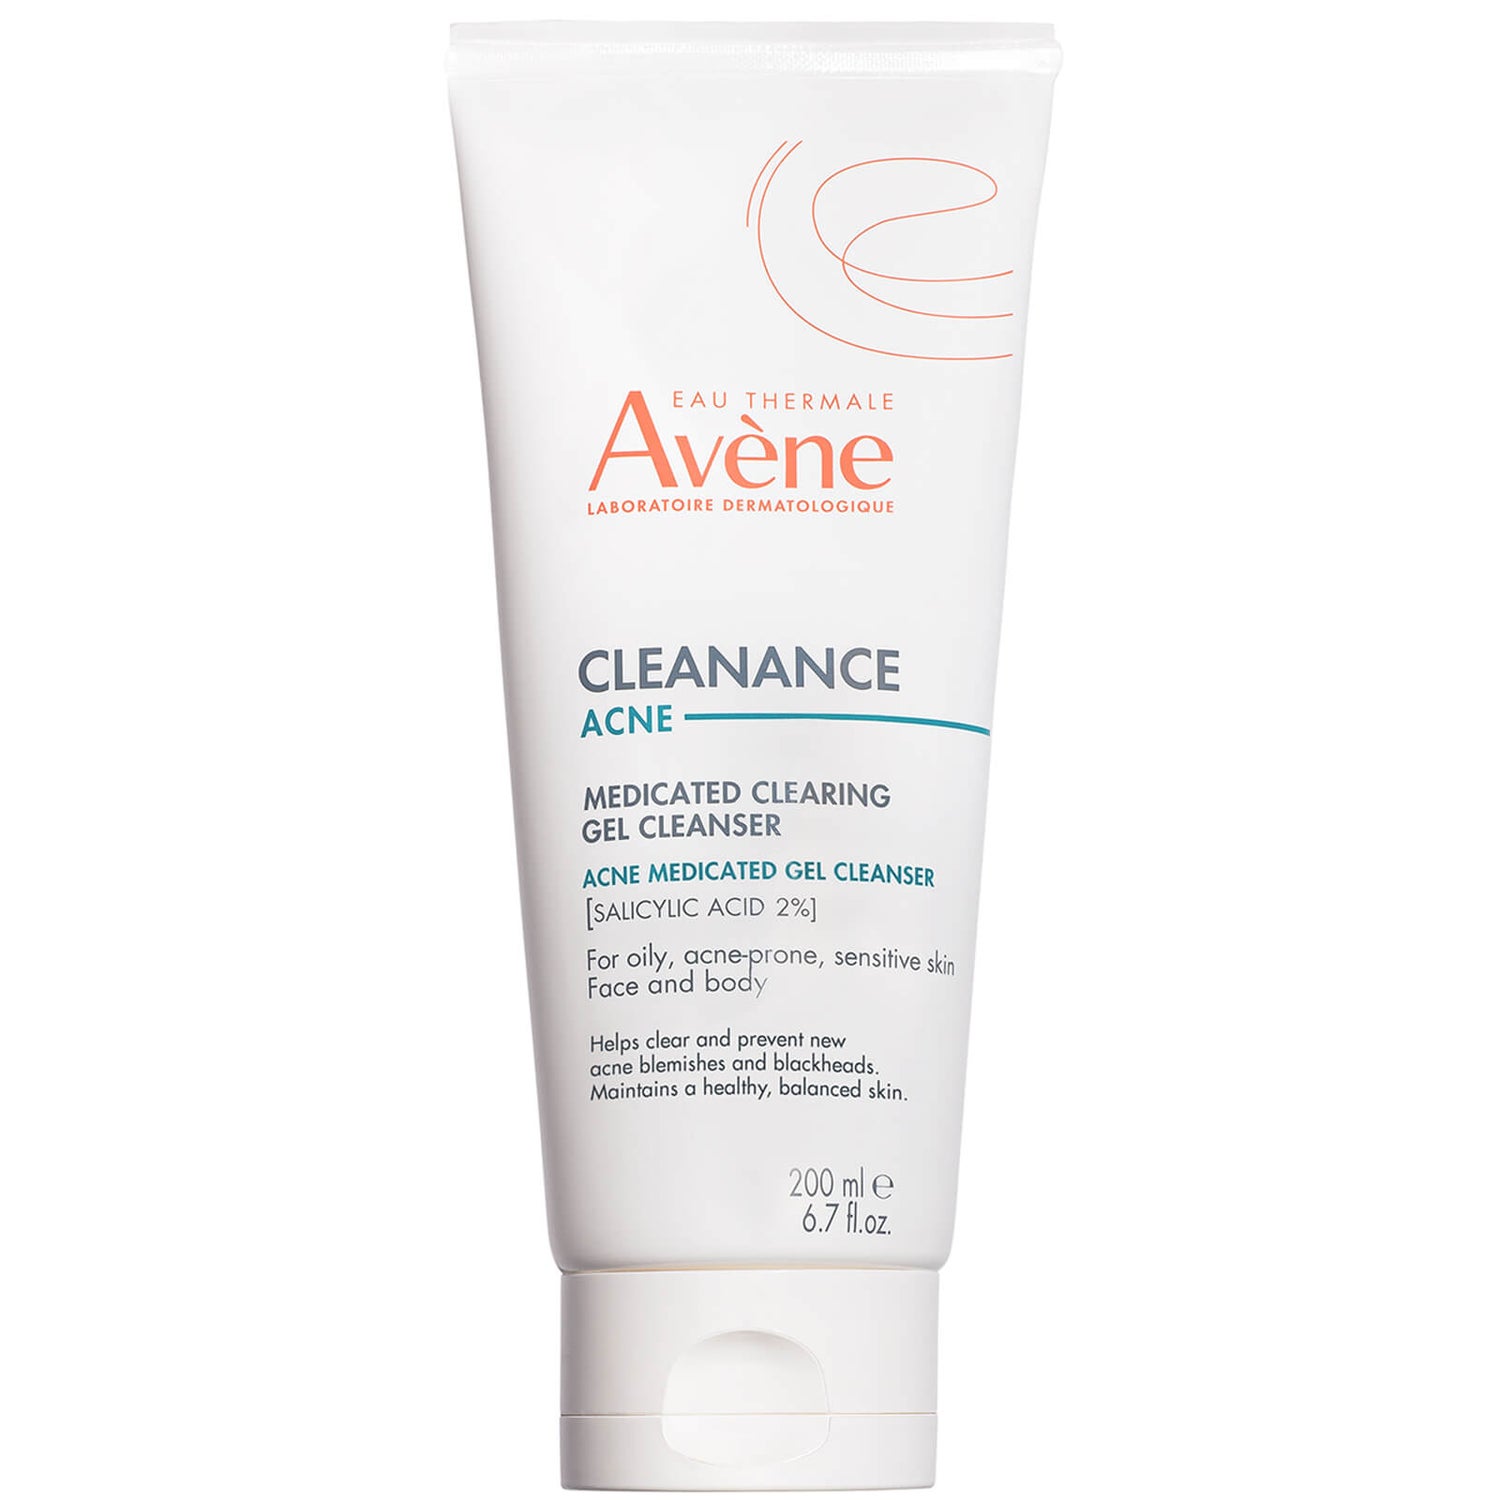 Avène Cleanance ACNE Medicated Clearing Gel Cleanser 6.7 fl. oz